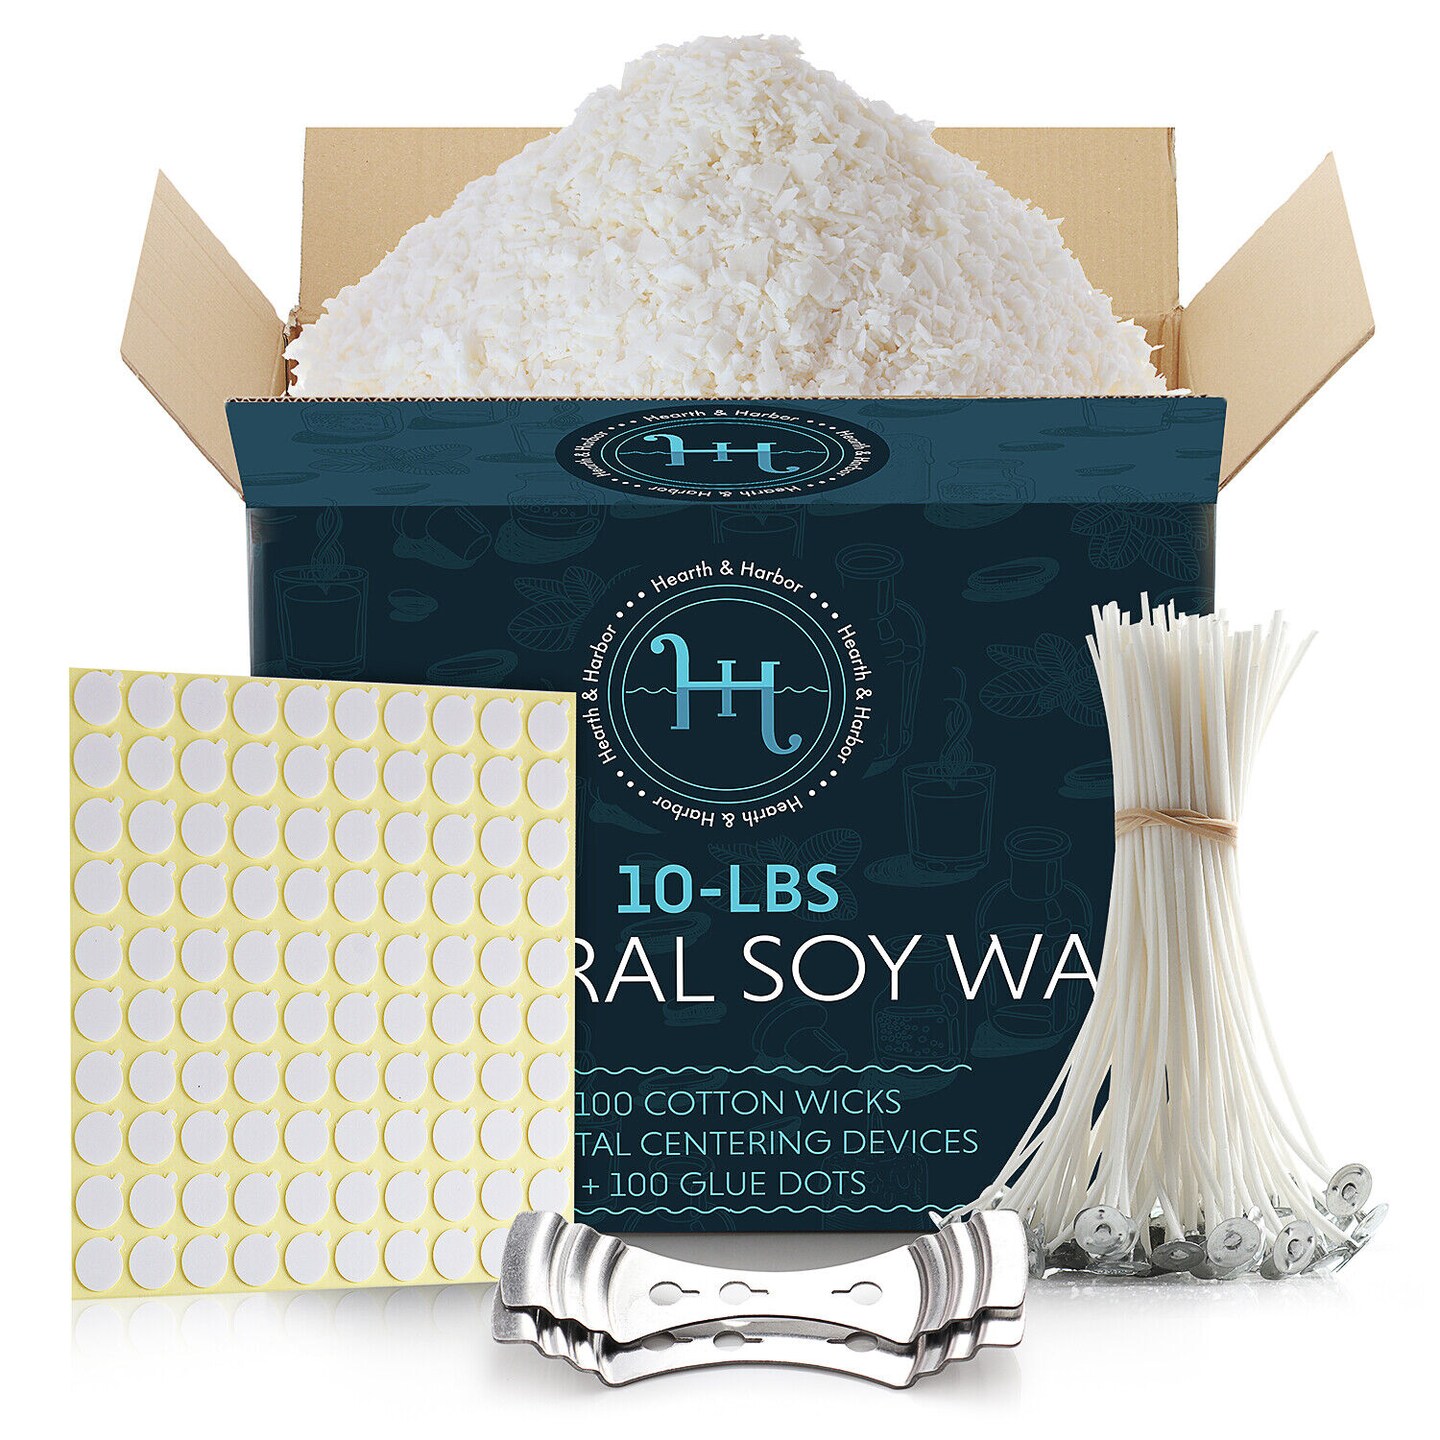 Soy Wax Flakes by Make Market®, Michaels